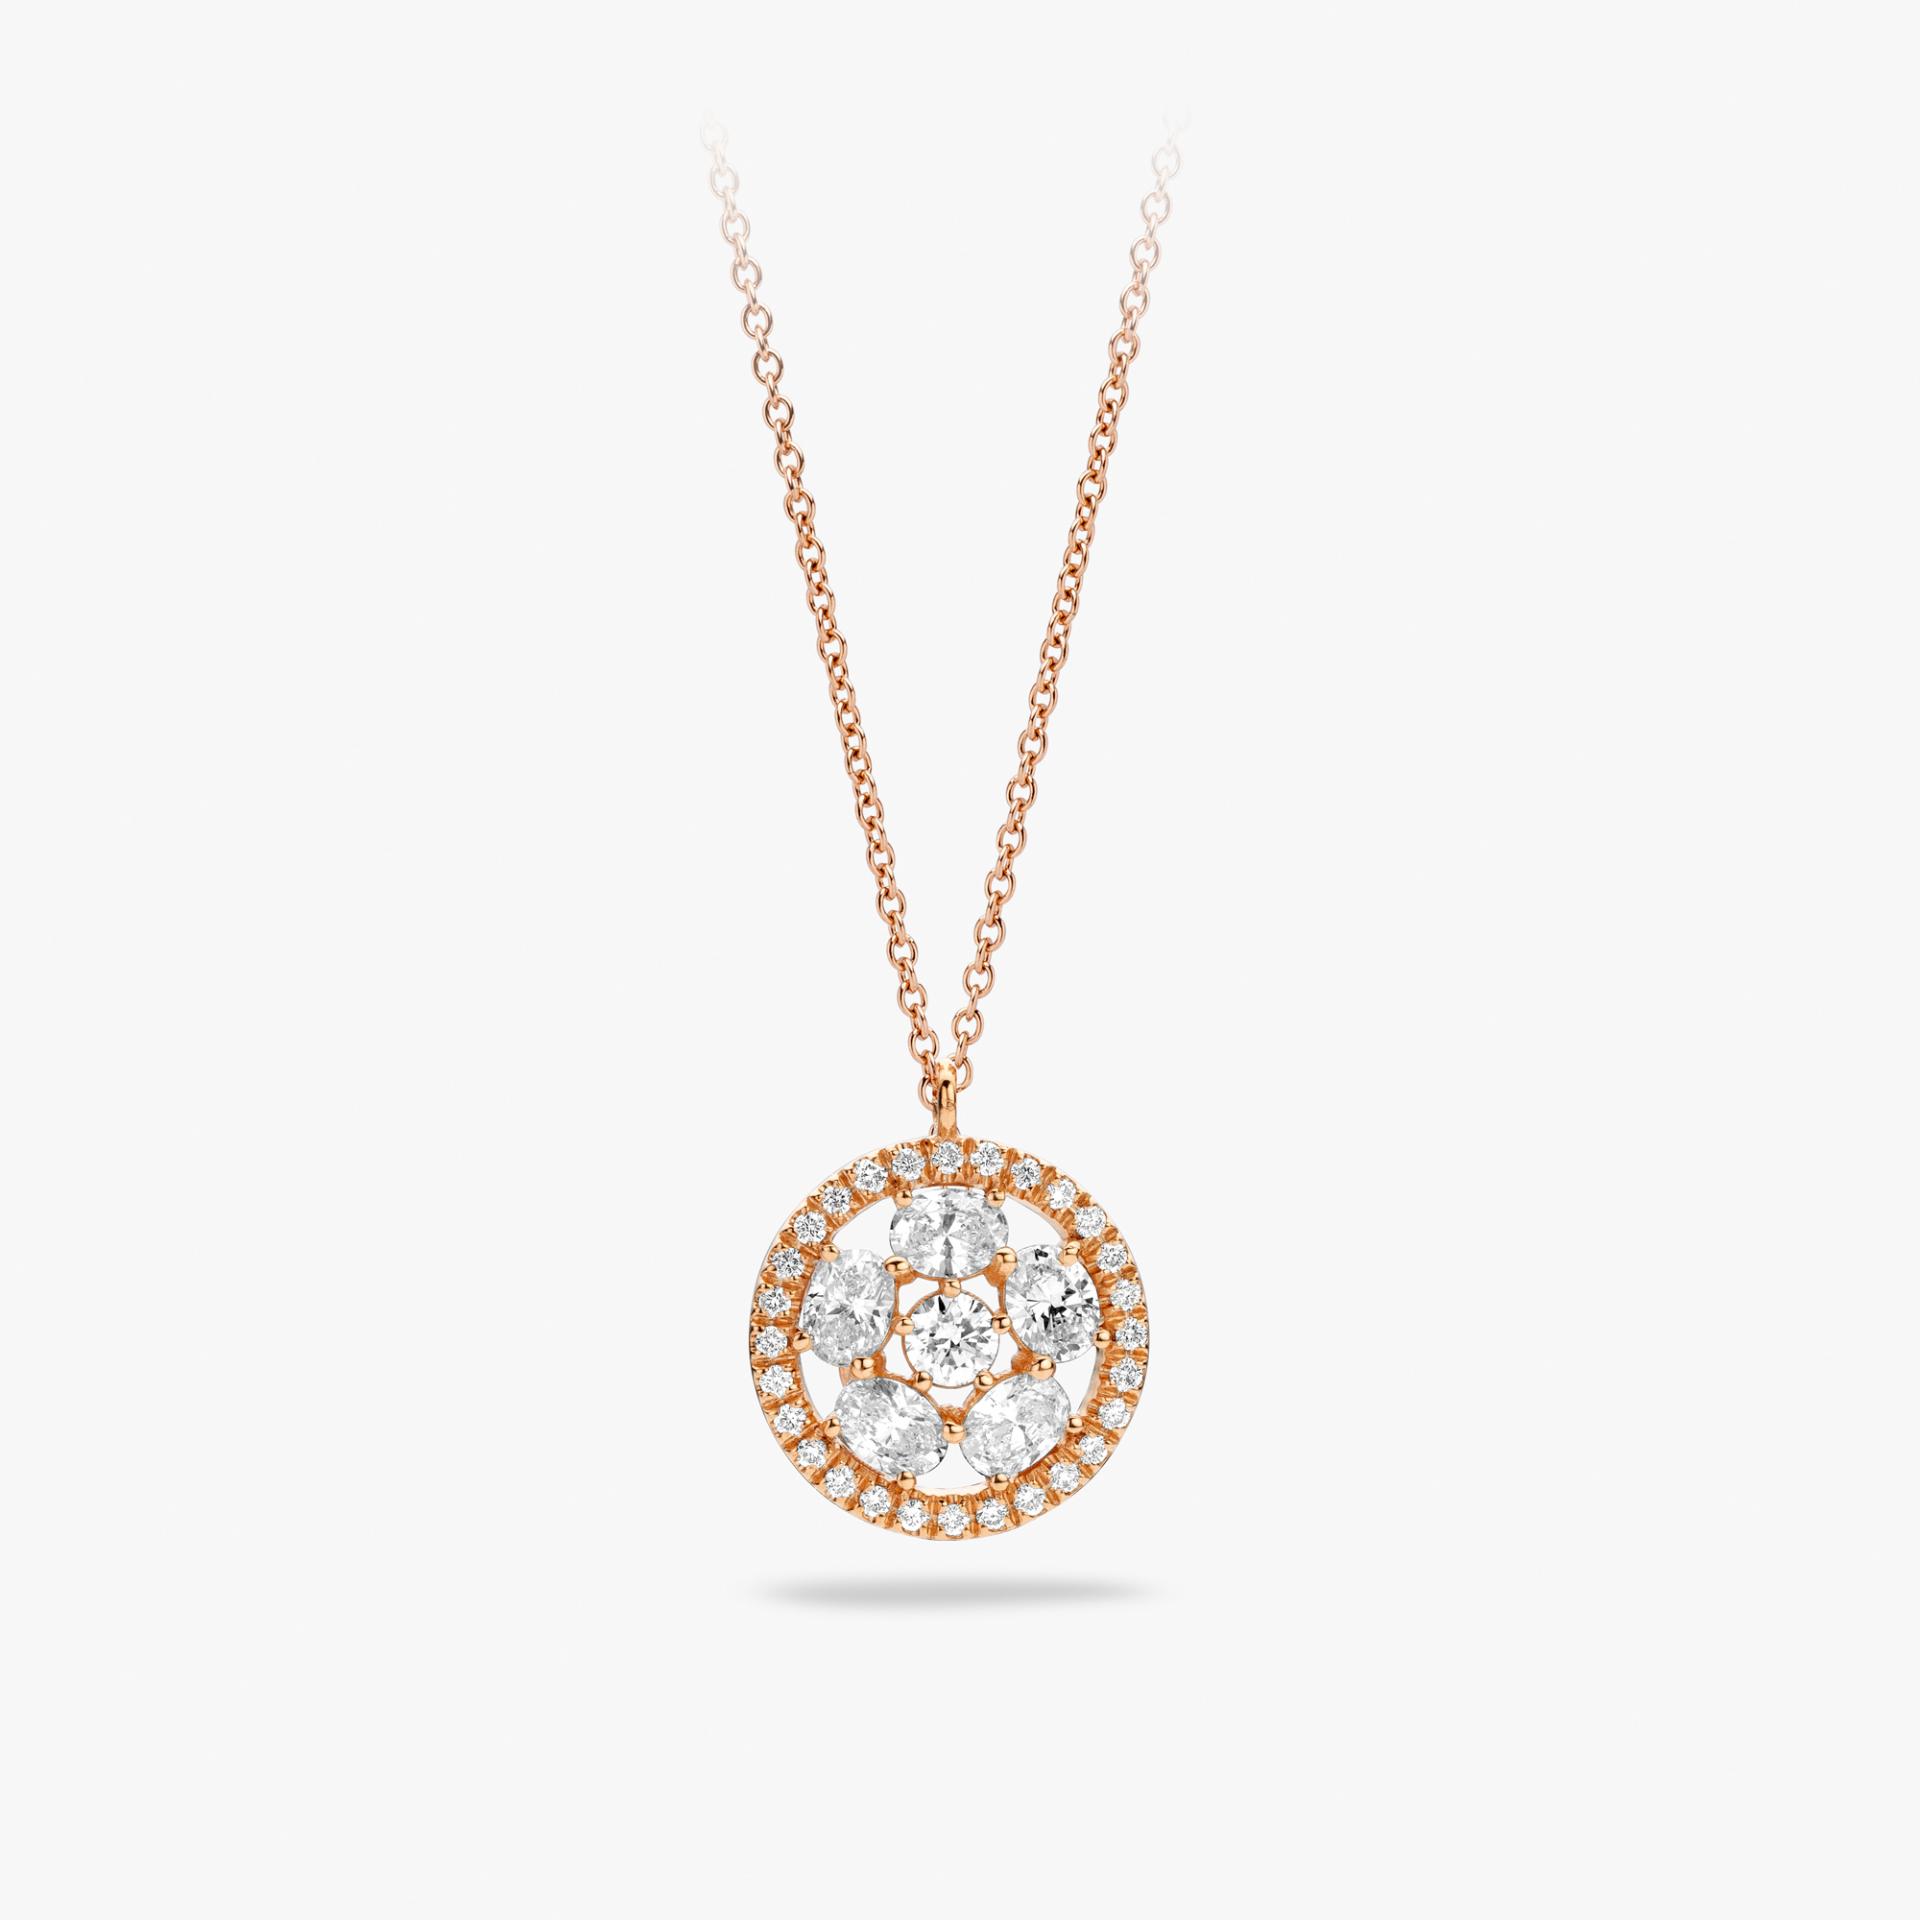 Rose gold pendant set with brilliants made by Maison De Greef